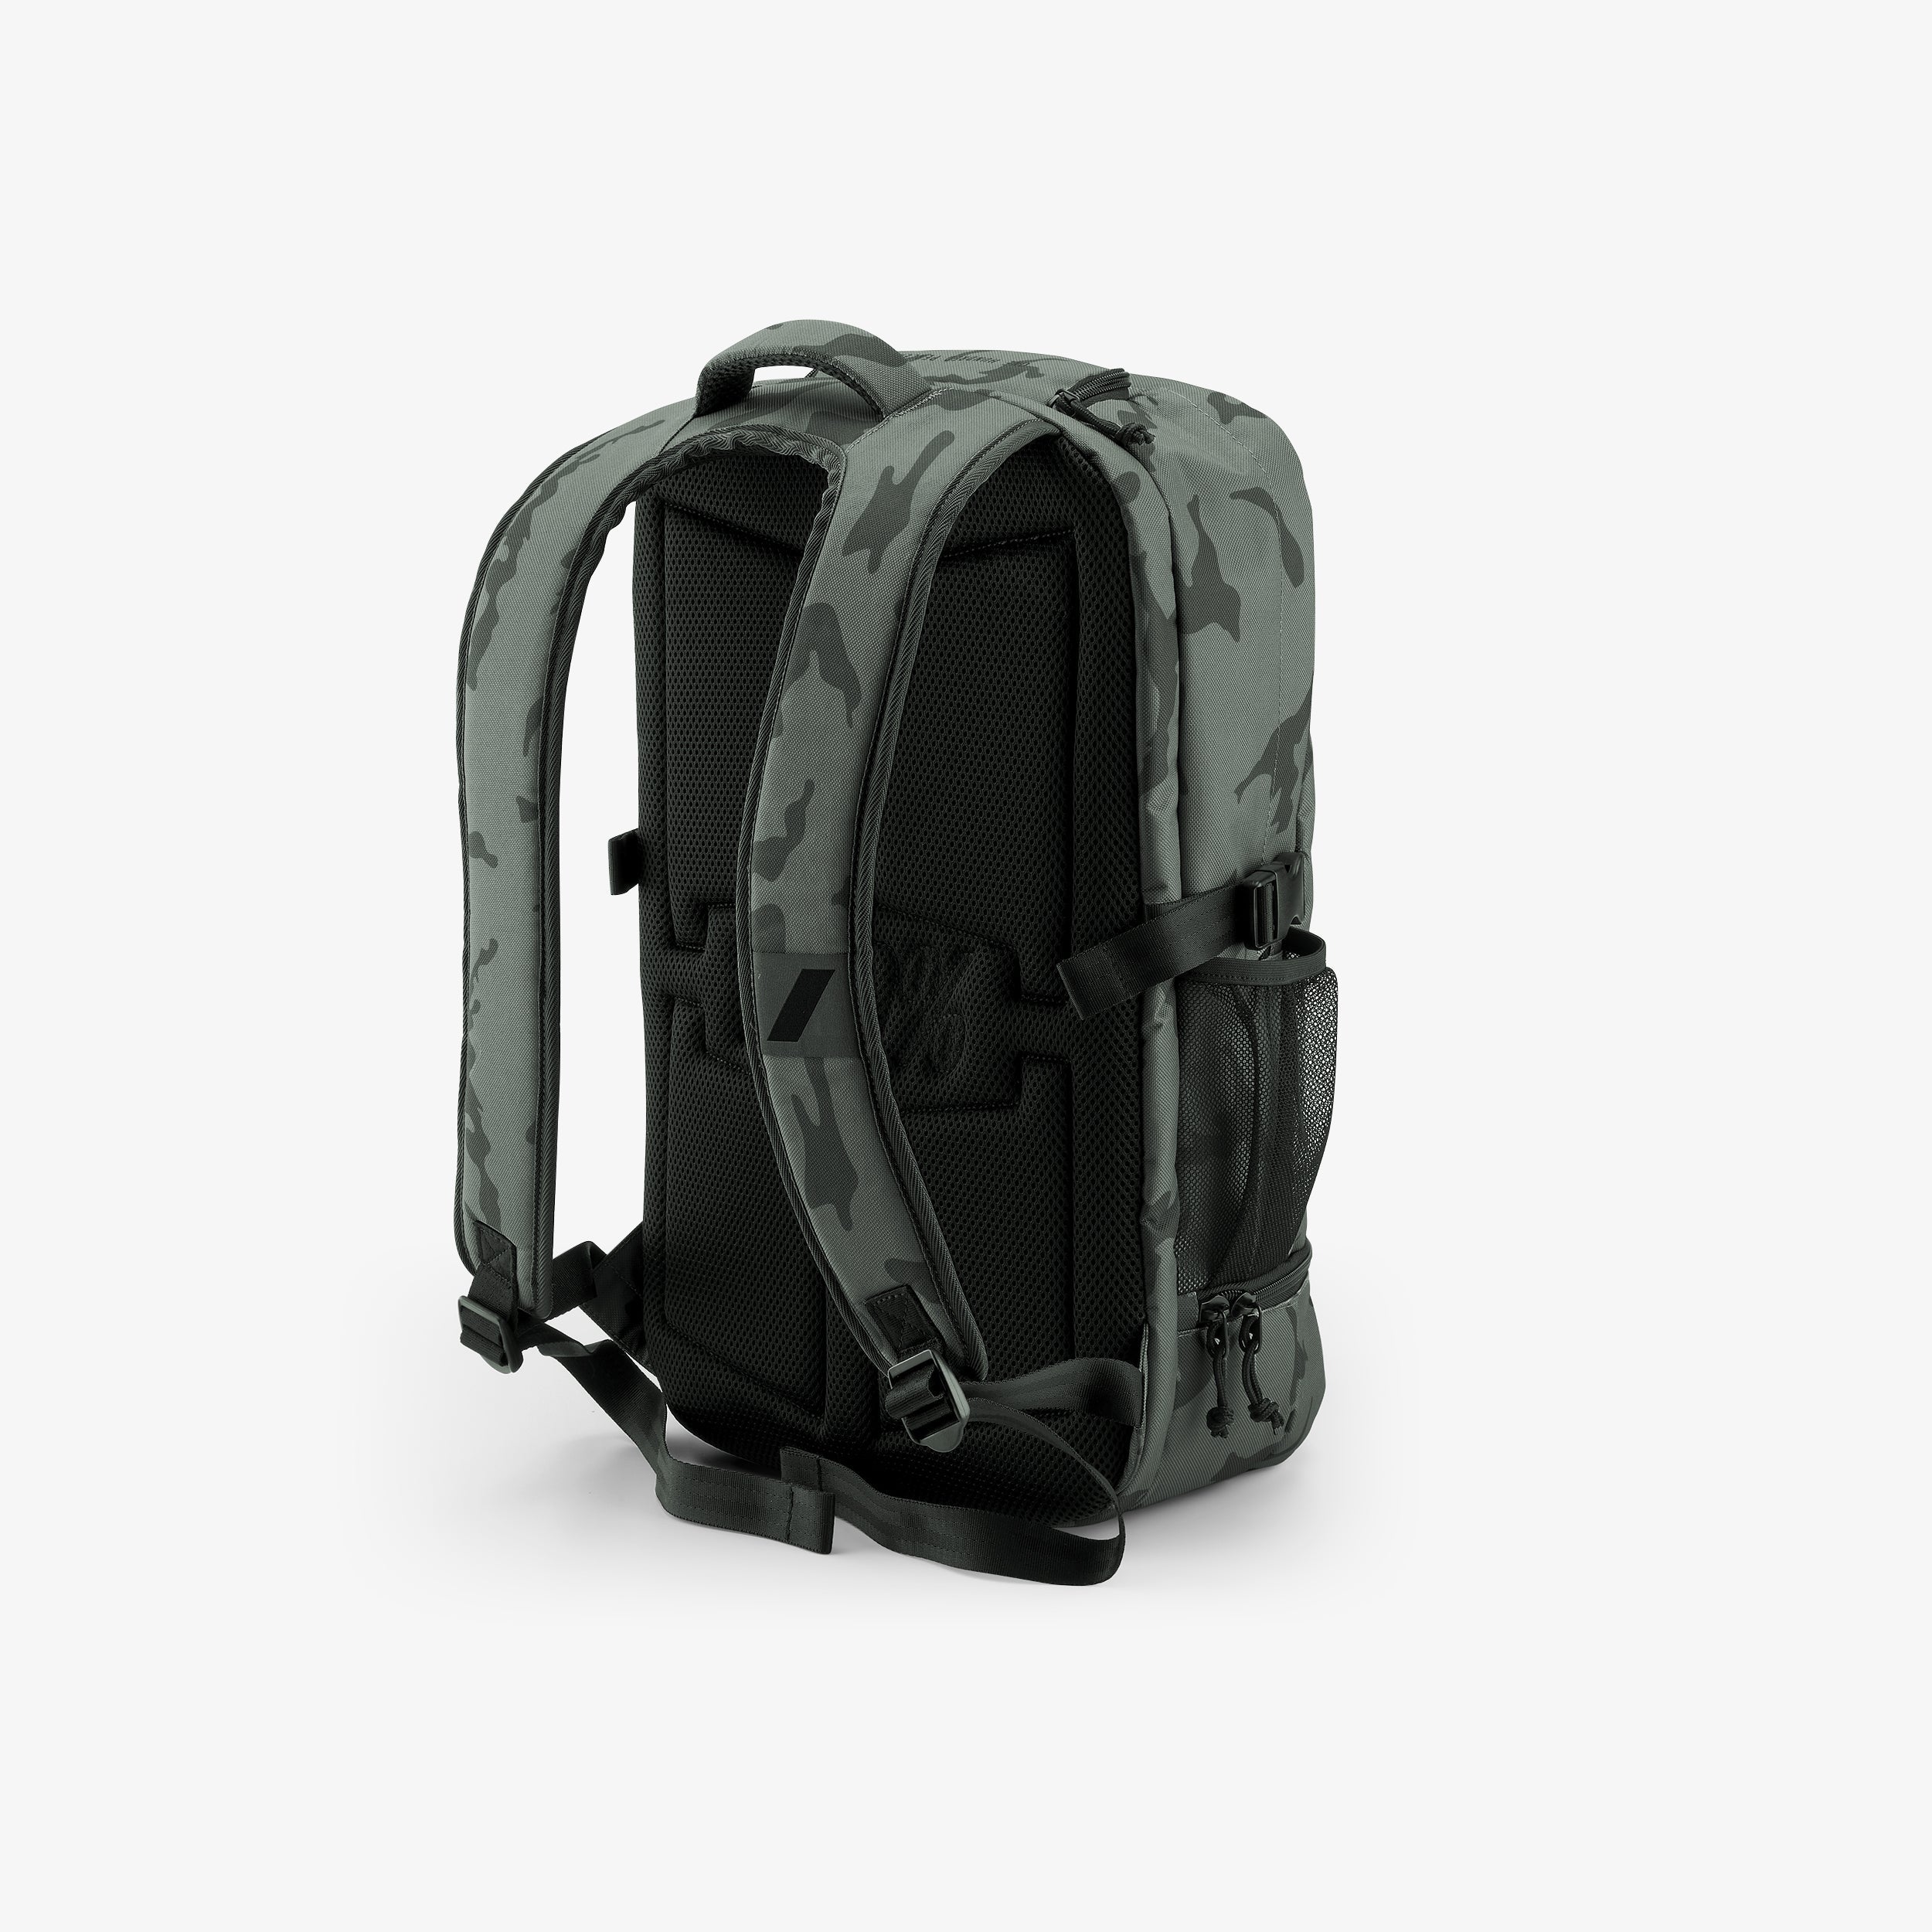 TRANSIT Backpack Grey Camo - Secondary